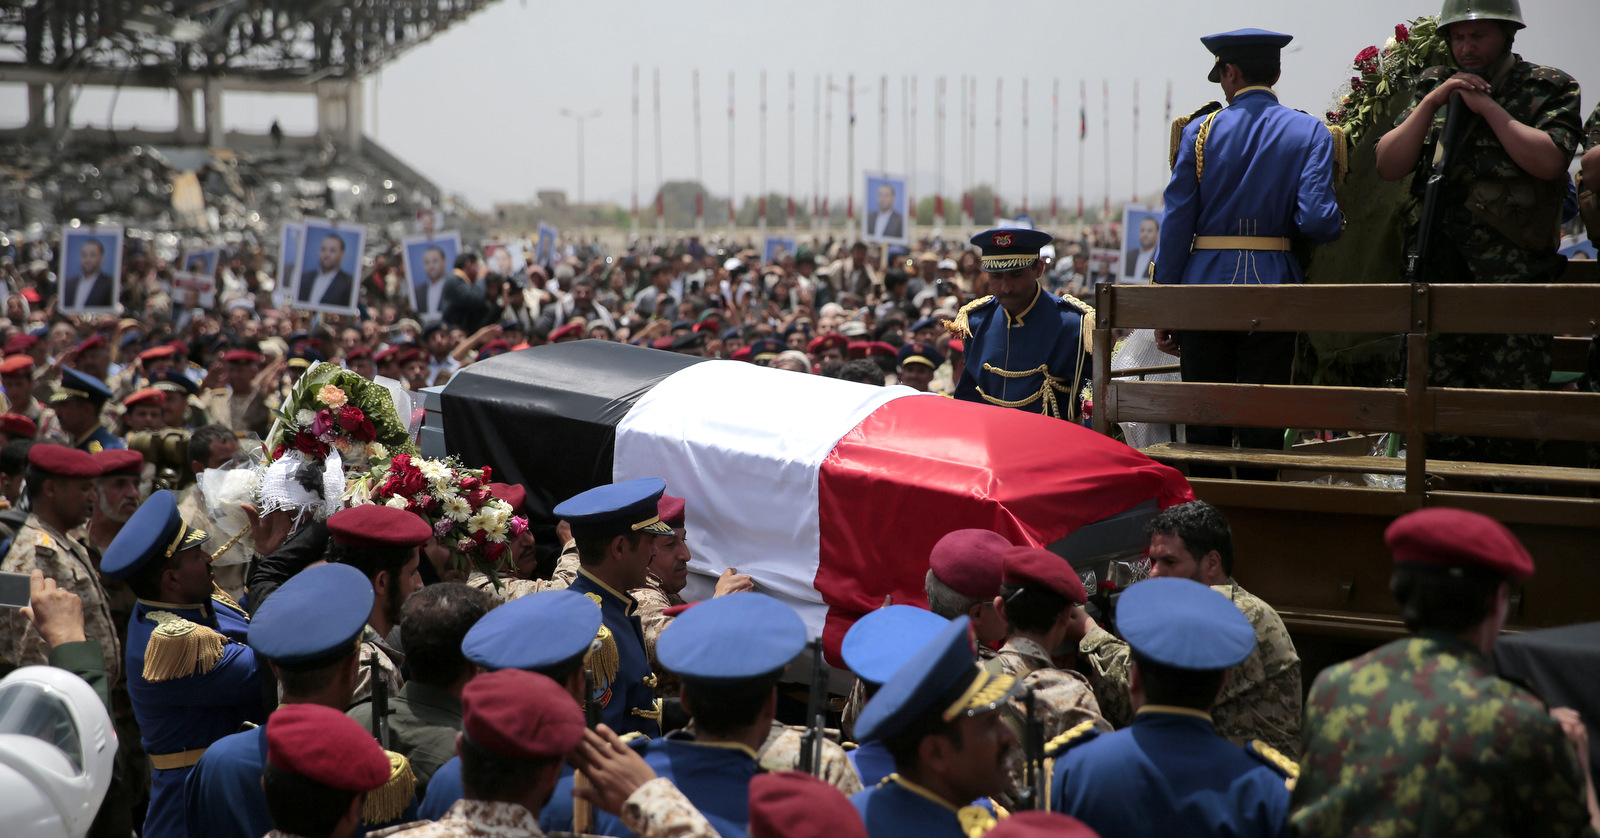 Yemeni honor guards carry the coffin of Saleh al-Samad, a senior Houthi official who was killed by a Saudi-led coalition airstrike on April 19, during his funeral procession in Sanaa, Yemen, April 28, 2018. (AP/Hani Mohammed)